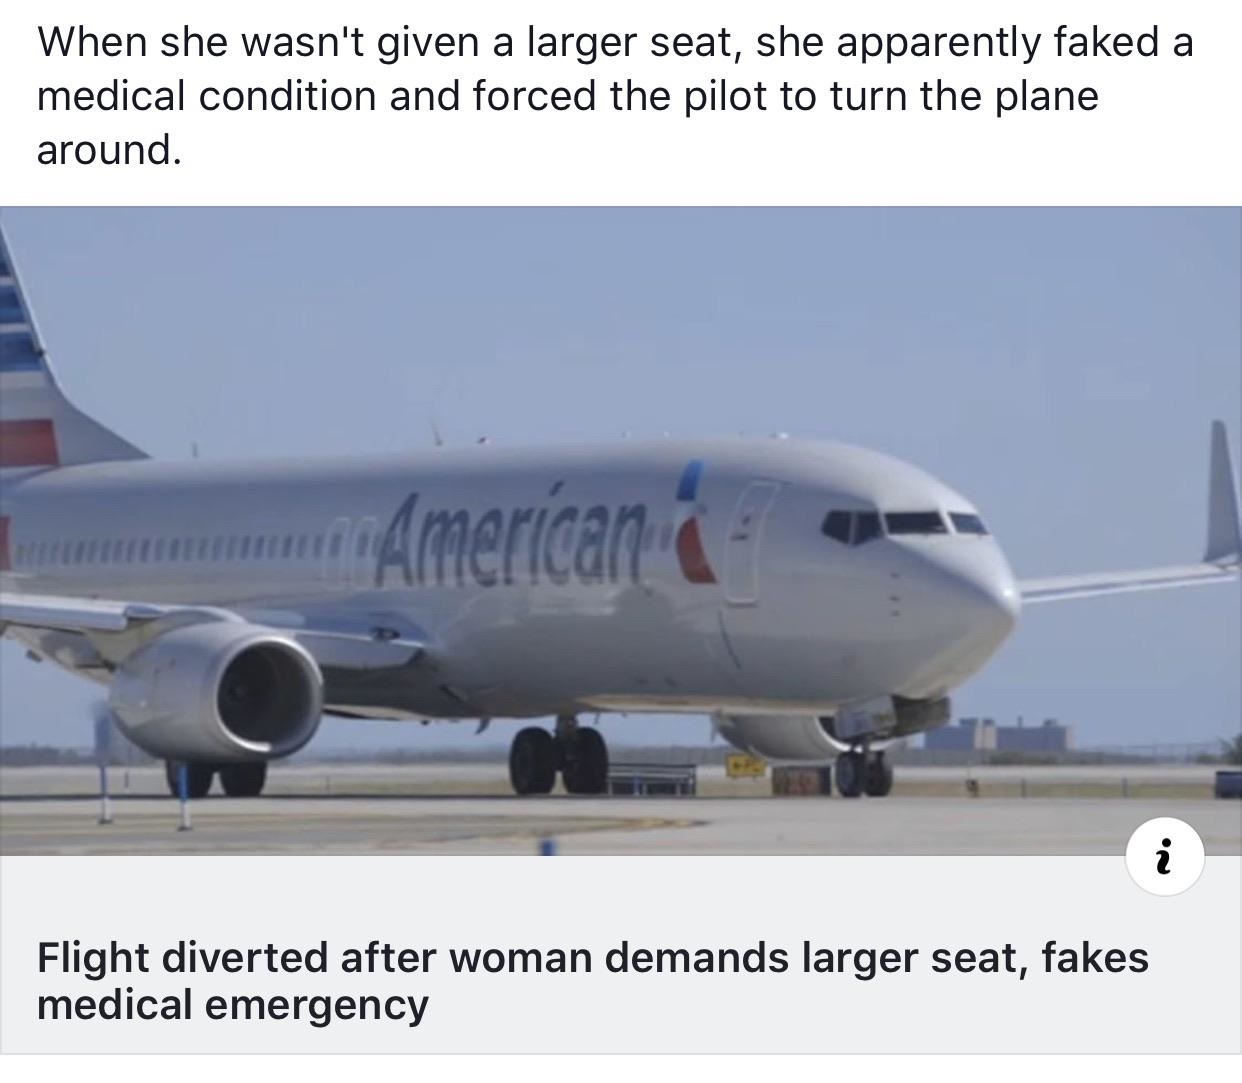 airline - When she wasn't given a larger seat, she apparently faked a medical condition and forced the pilot to turn the plane around. Flight diverted after woman demands larger seat, fakes medical emergency